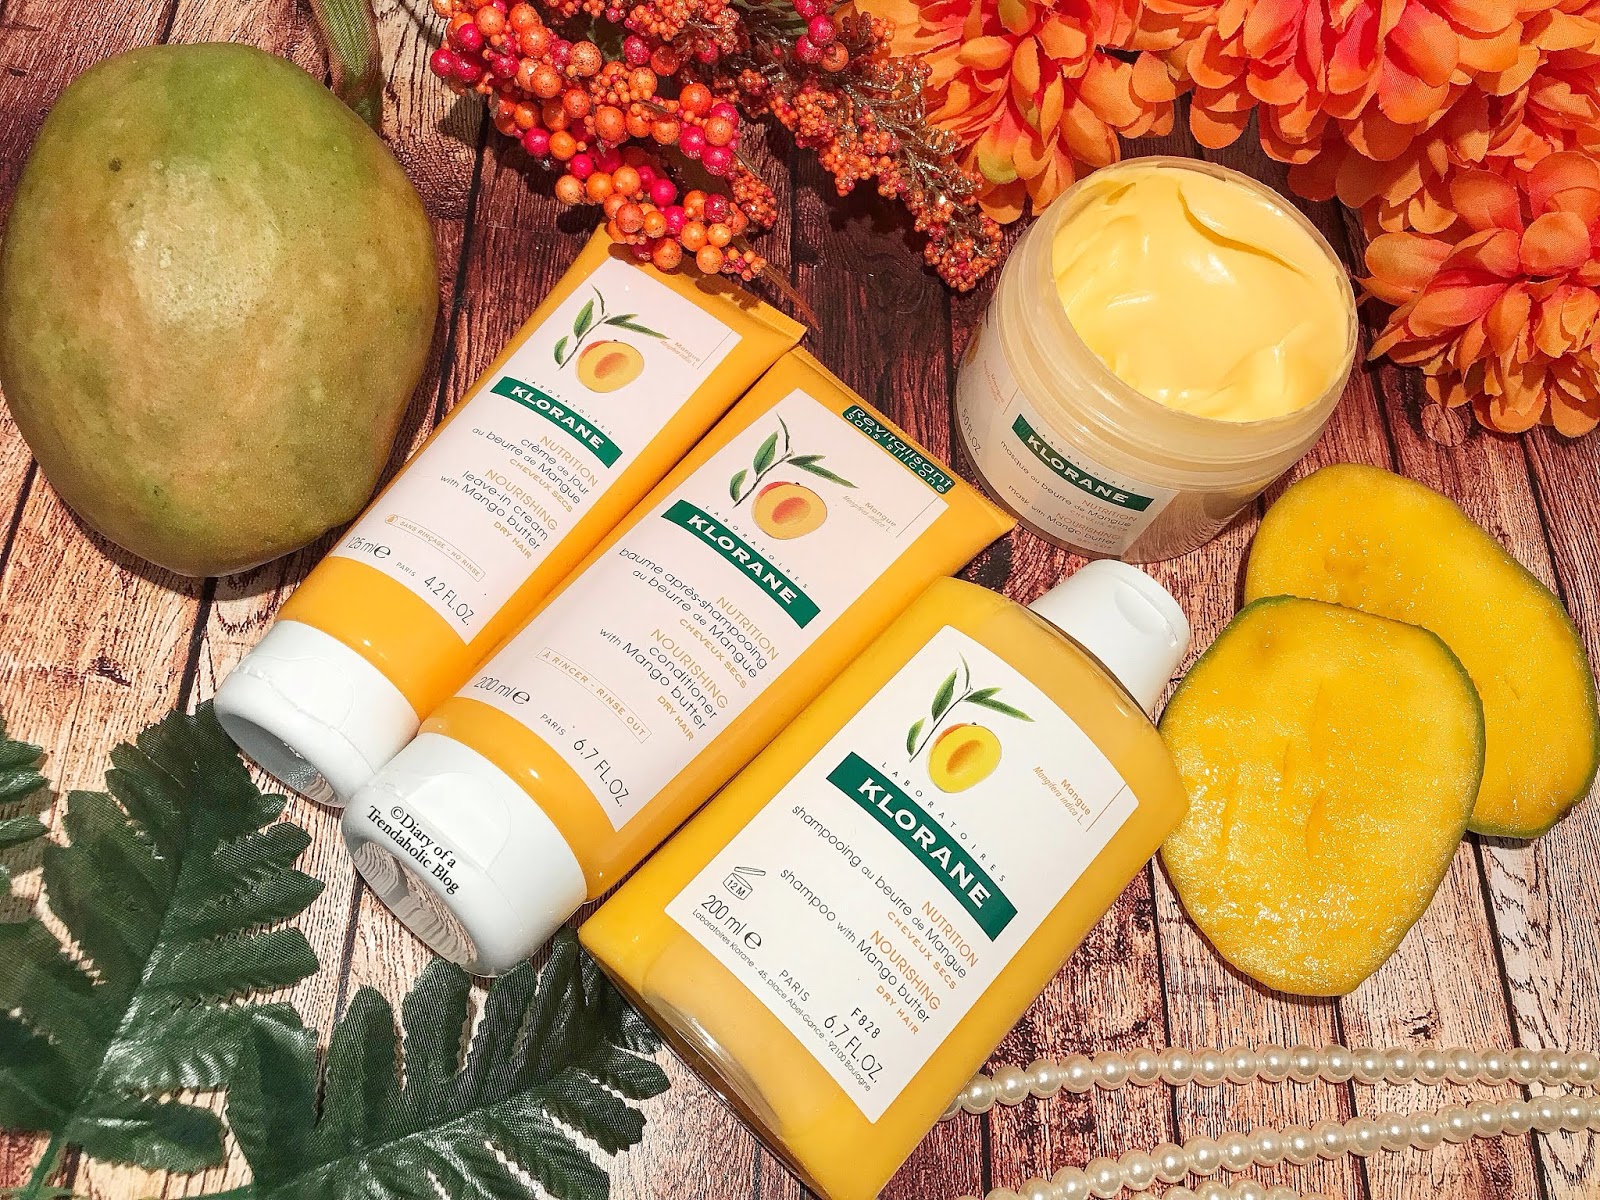 Diplomat søm Synslinie Diary of a Trendaholic : Klorane Nourishing Mango Butter Hair Care Review